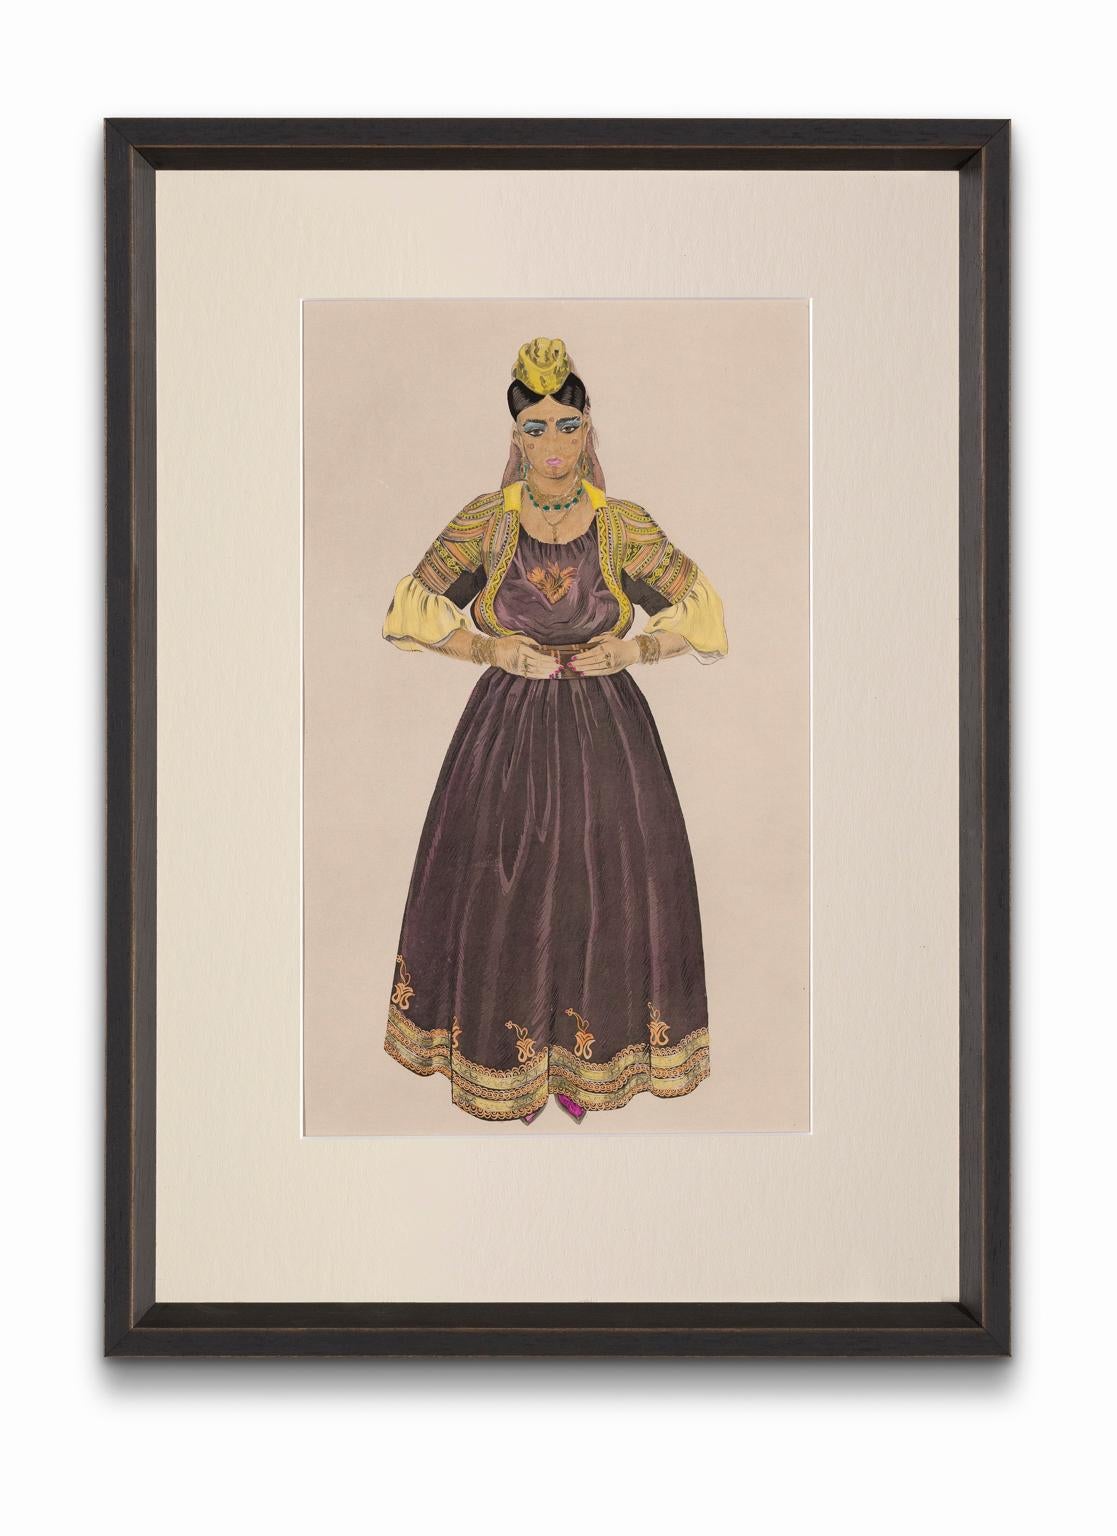 "Jewish Bride of Fez" from "Costumes of Morocco", Gouache on Paper